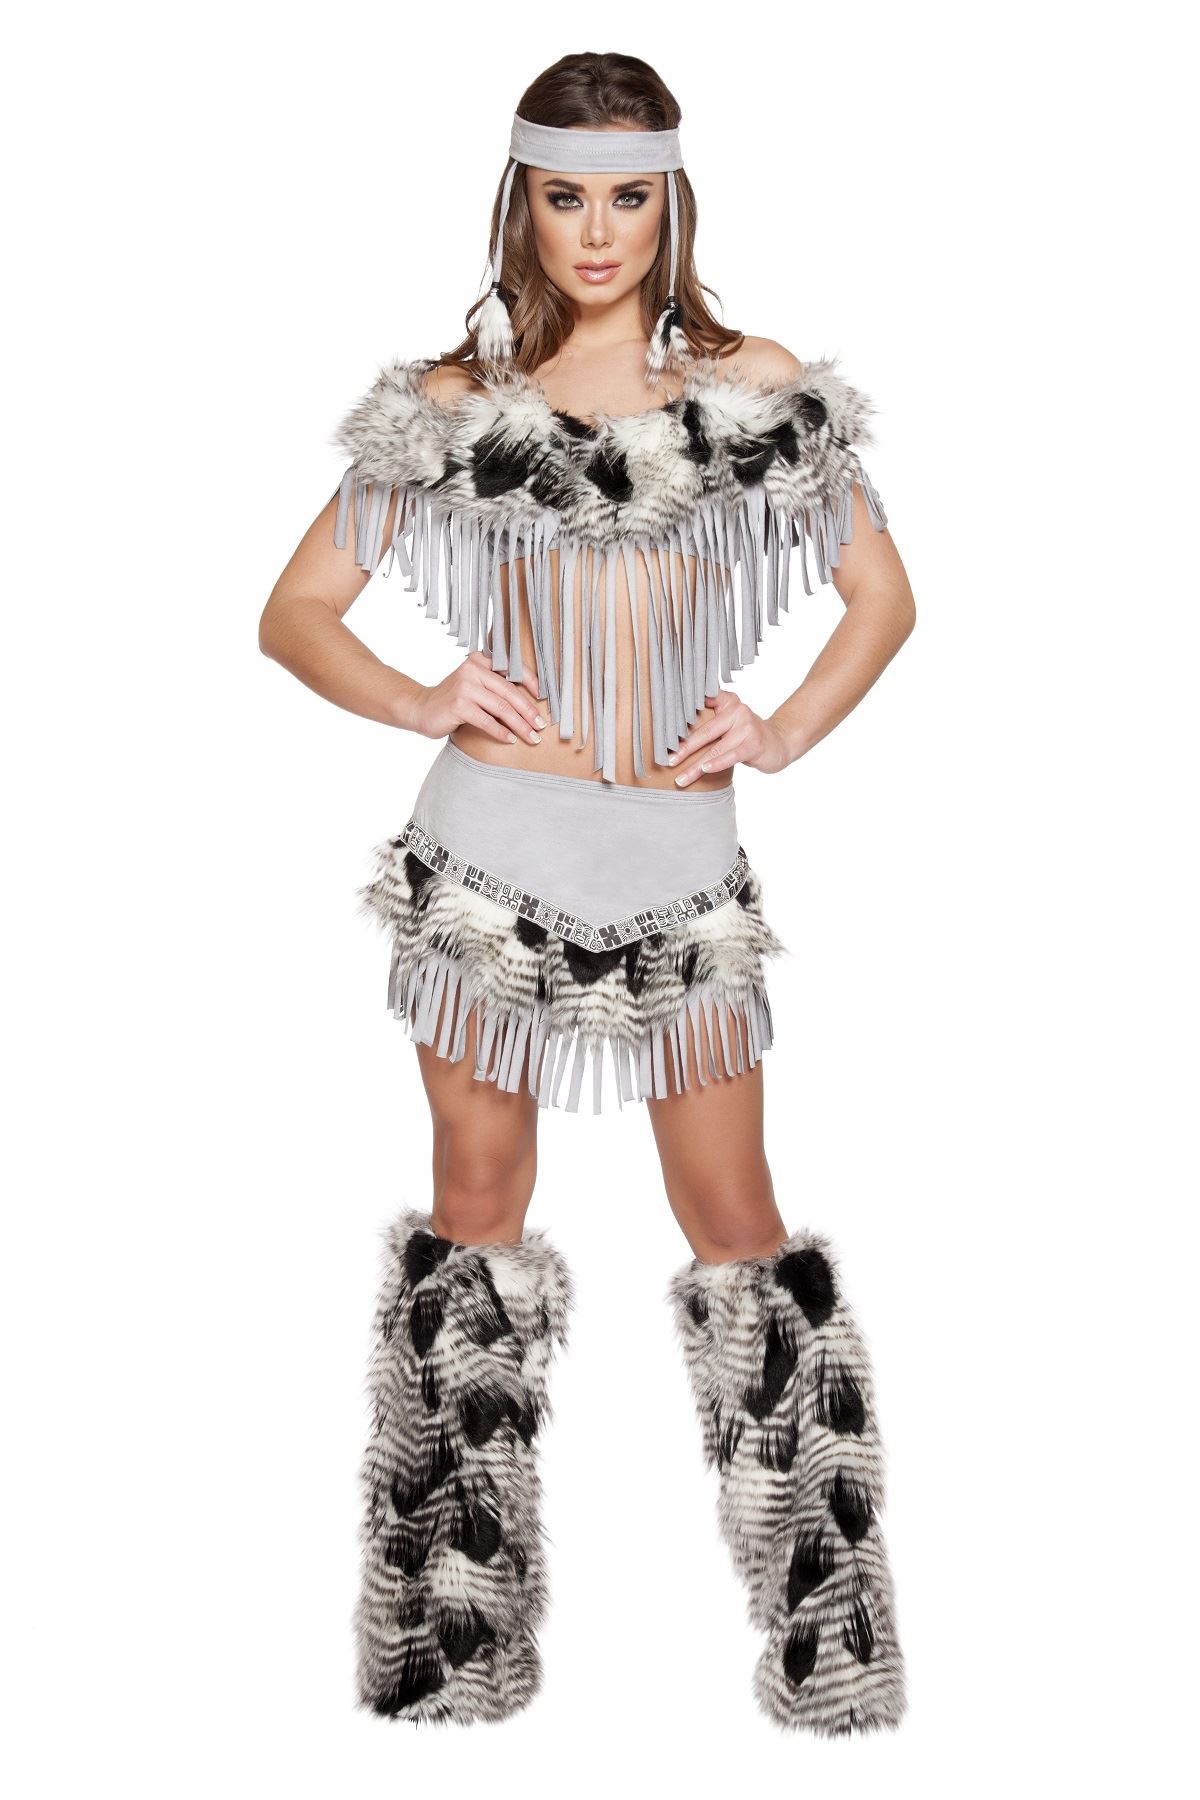 Adult Native American Indian Maiden Woman Costume 8599 The Costume Land 